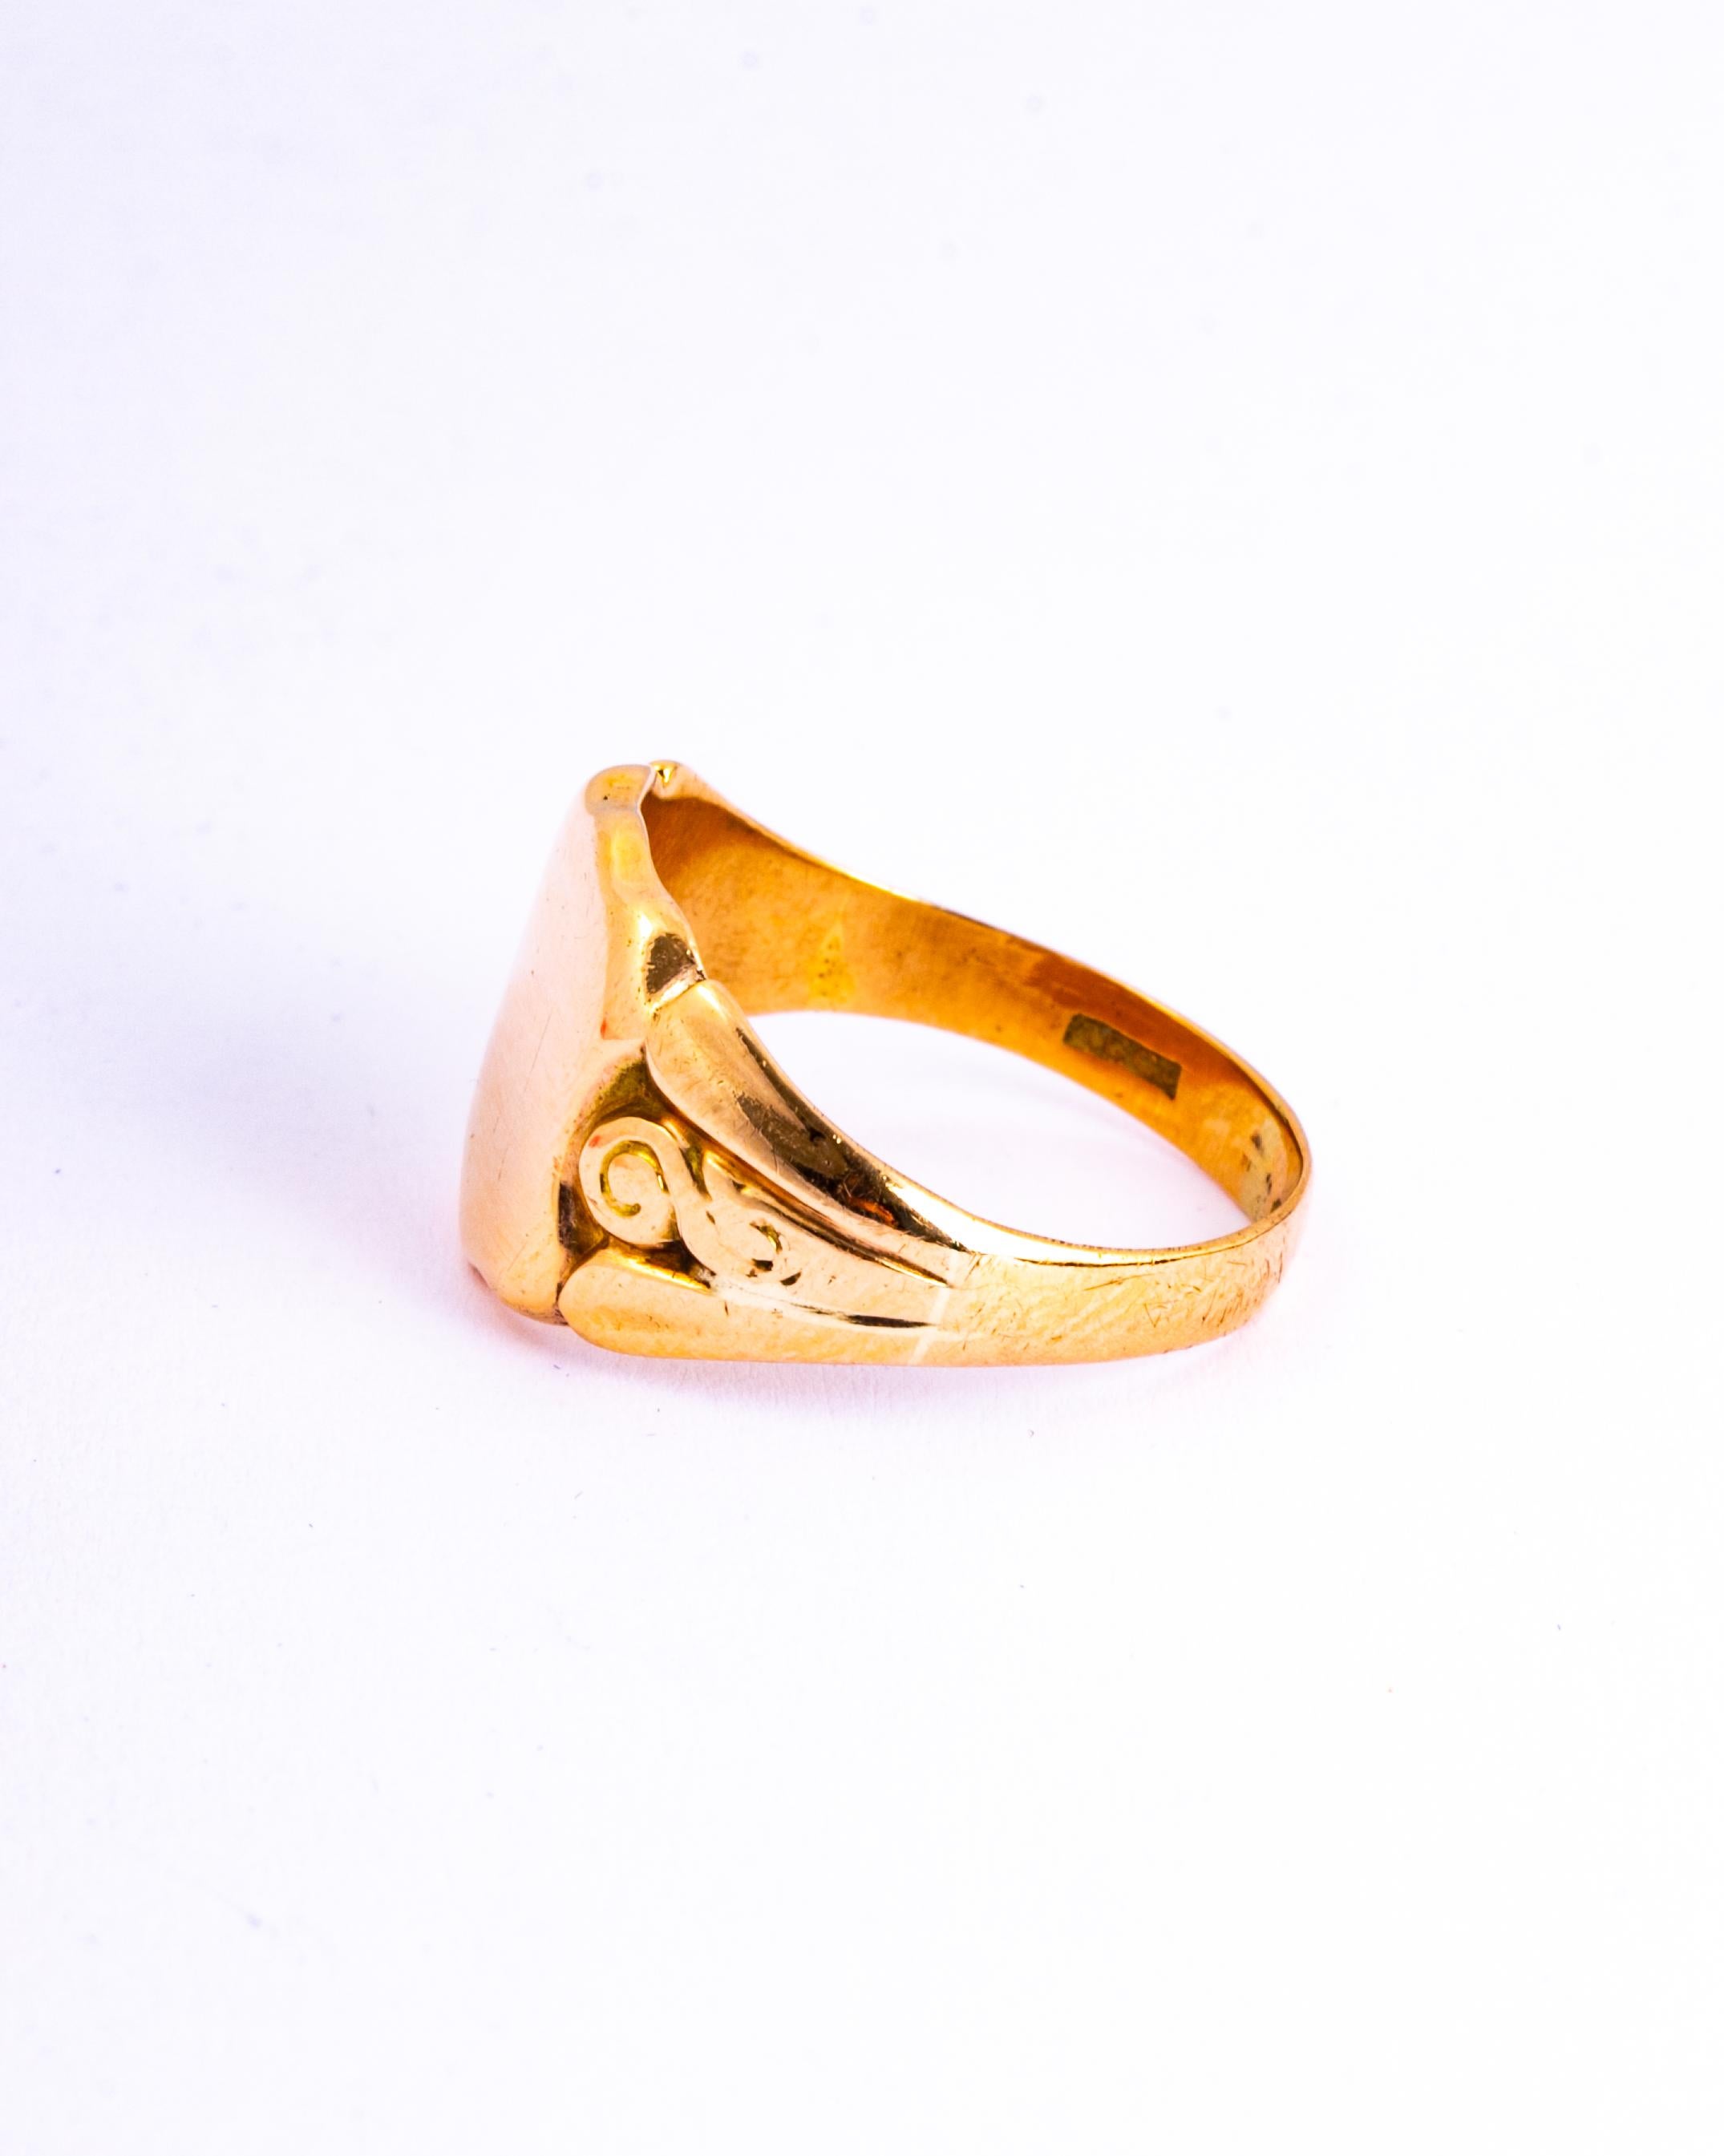 The face of this ring is a large glossy shied shape. The chunky shoulders are have scroll detail and carry on down into a plain band modelled in 9ct gold. 

RIng Size: Q or 8 1/4
Widest Part: 13mm 

Weight: 4.8g